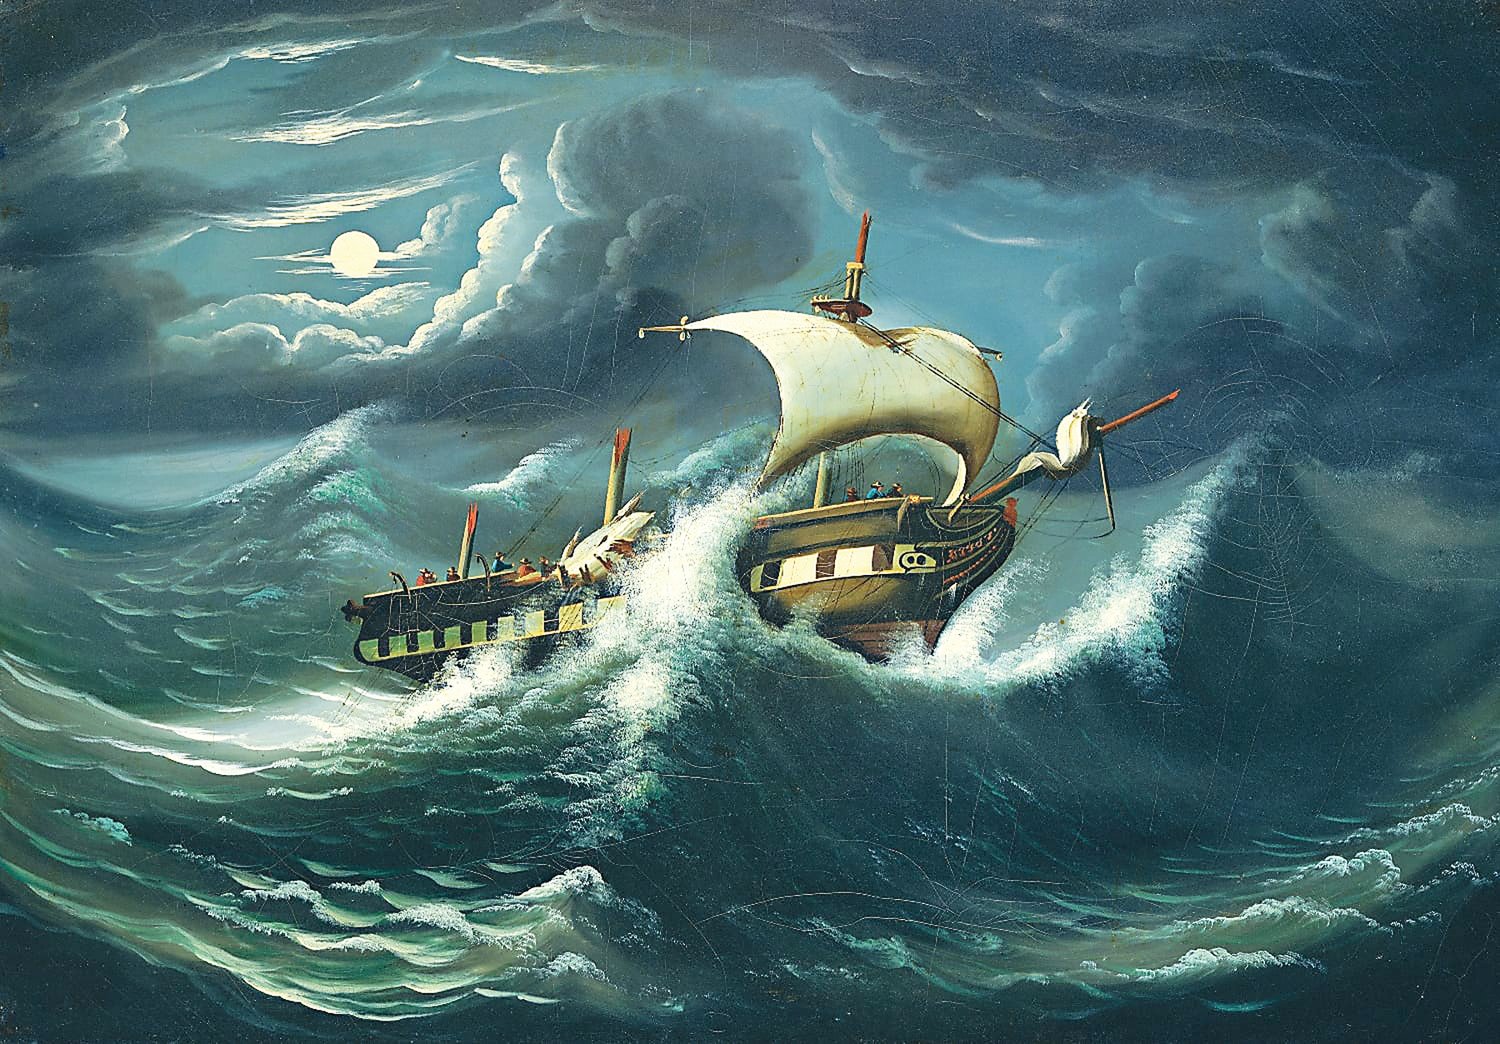 “Storm Tossed Frigate” is an oil painting by Thomas Chambers, part of “The Color of the Moon: Lunar Painting in American Art” at the Michener Art Museum.